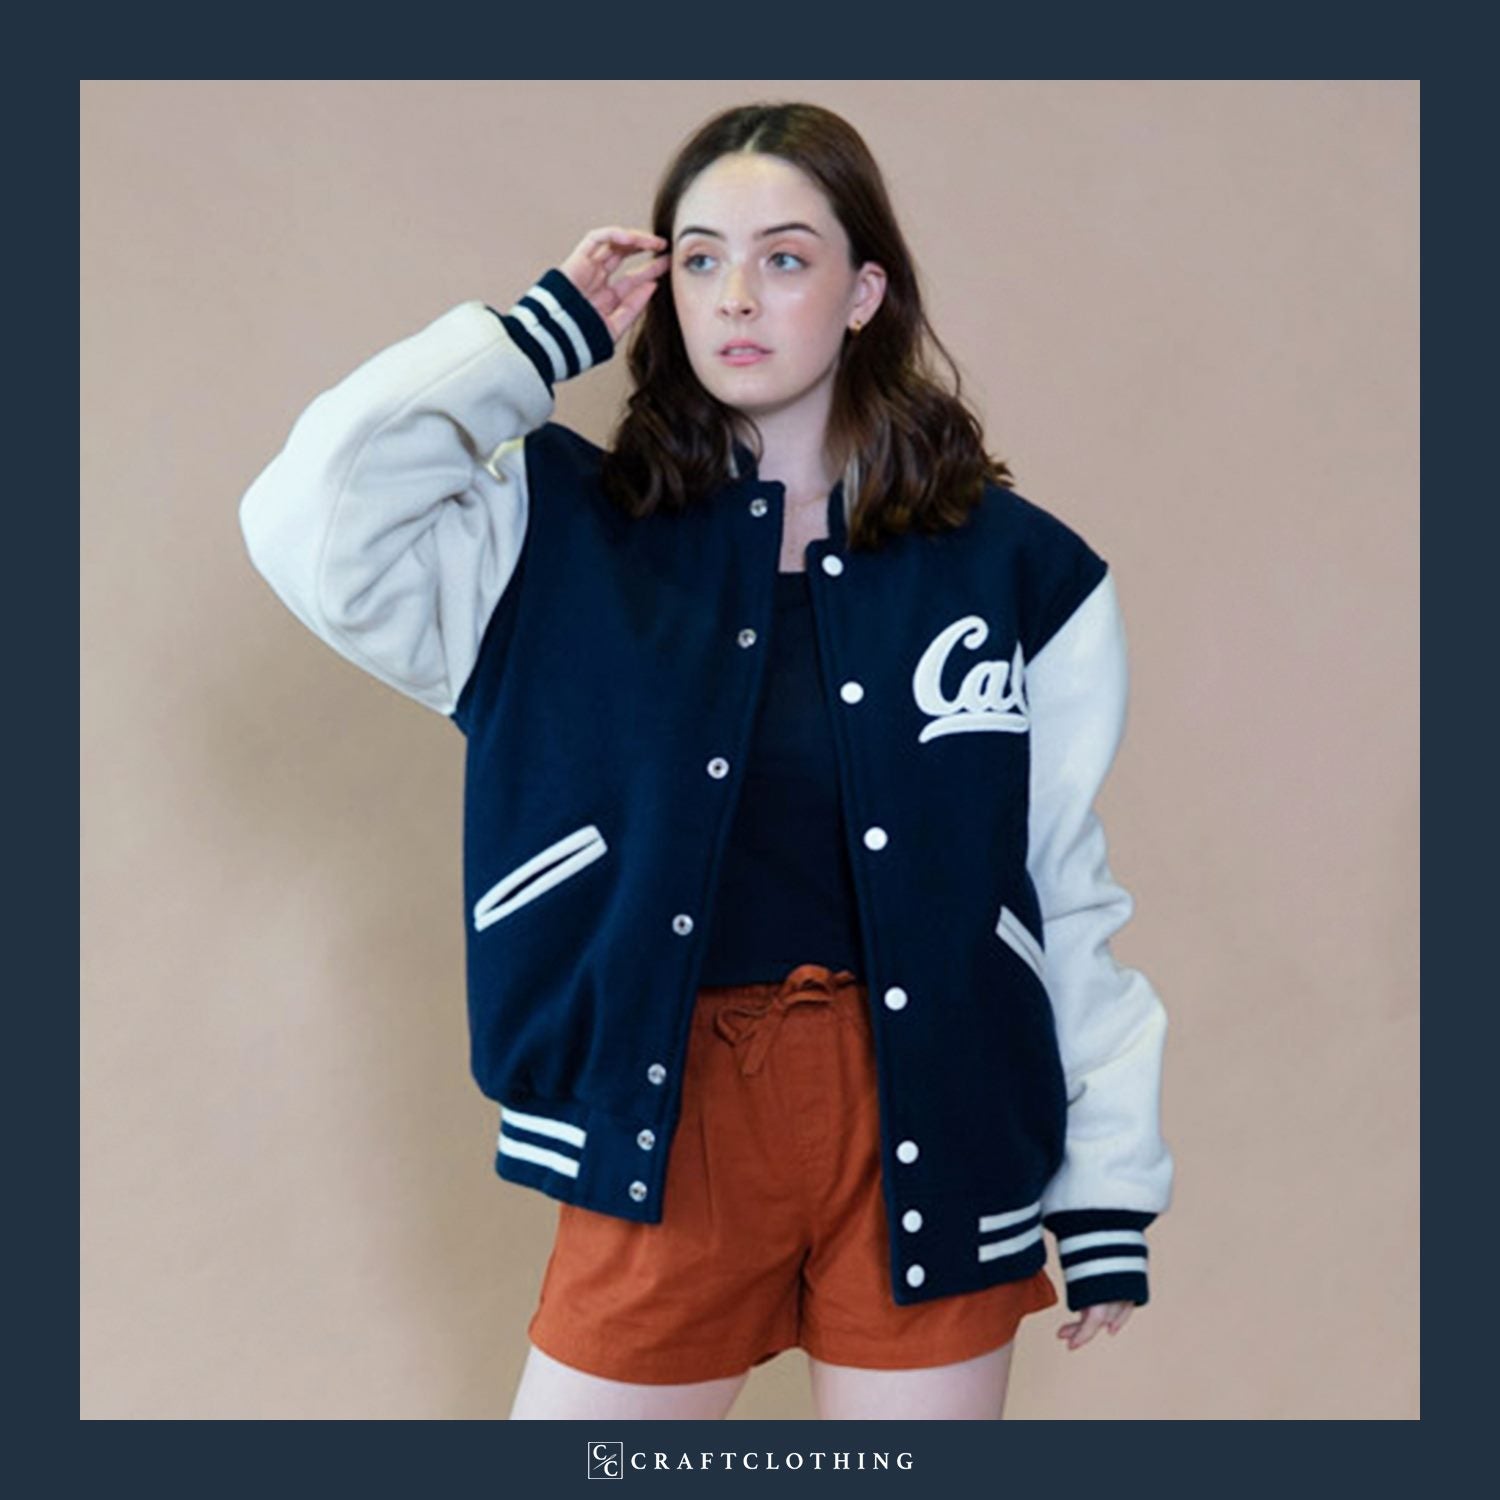 Your school or company jackets can look modern and stylish by adapting to the chic varsity jacket look just like this one.